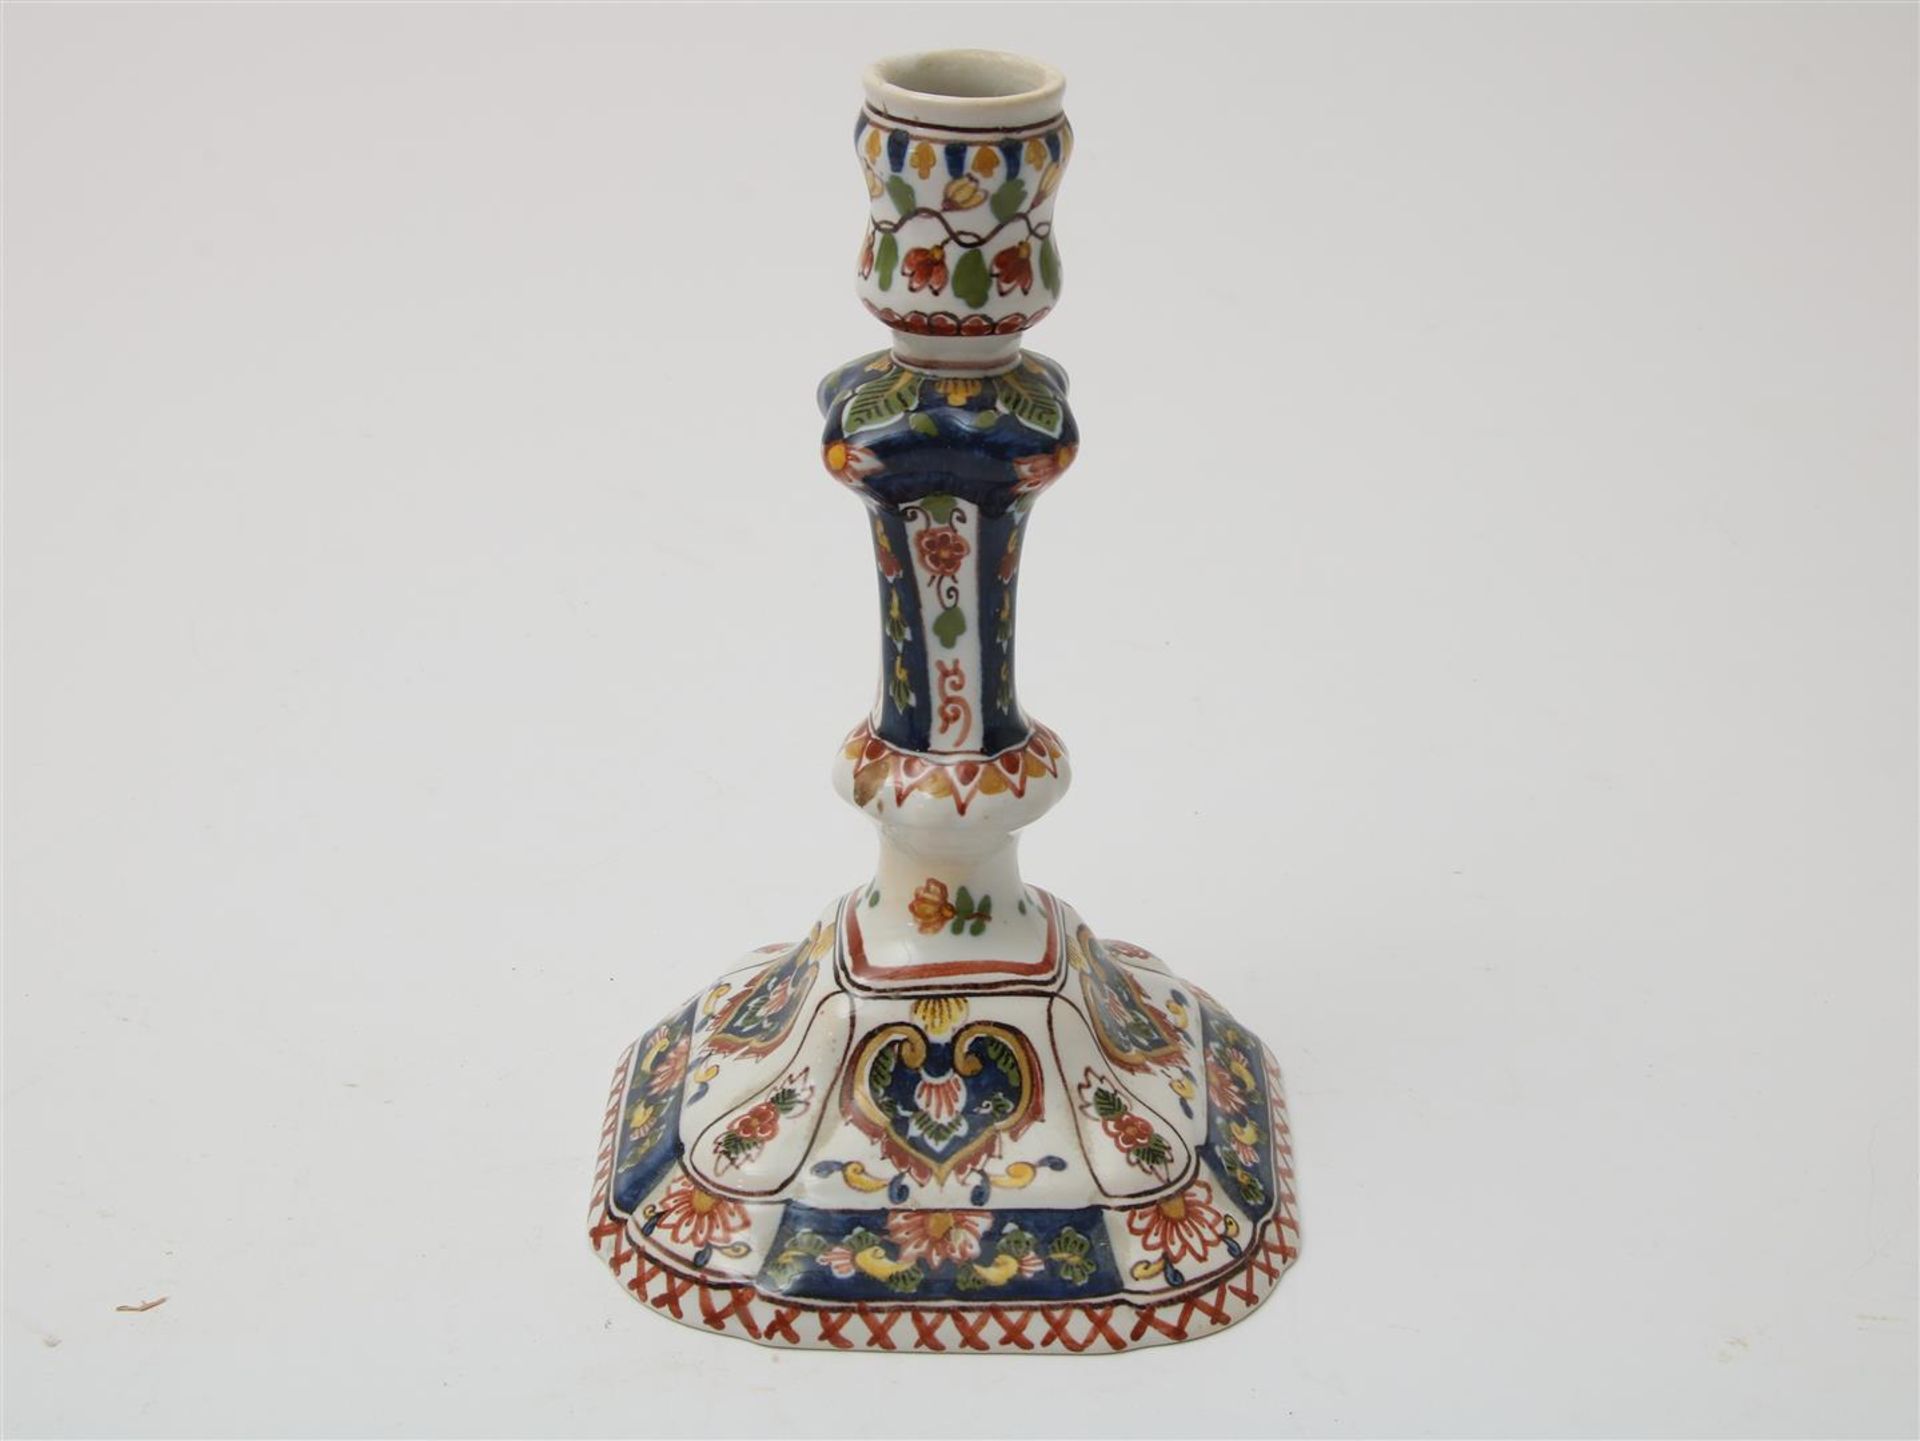 Lot of a polychrome earthenware candlestick, h. 21 cm., polychrome earthenware tea caddy, h. 13 - Image 7 of 9